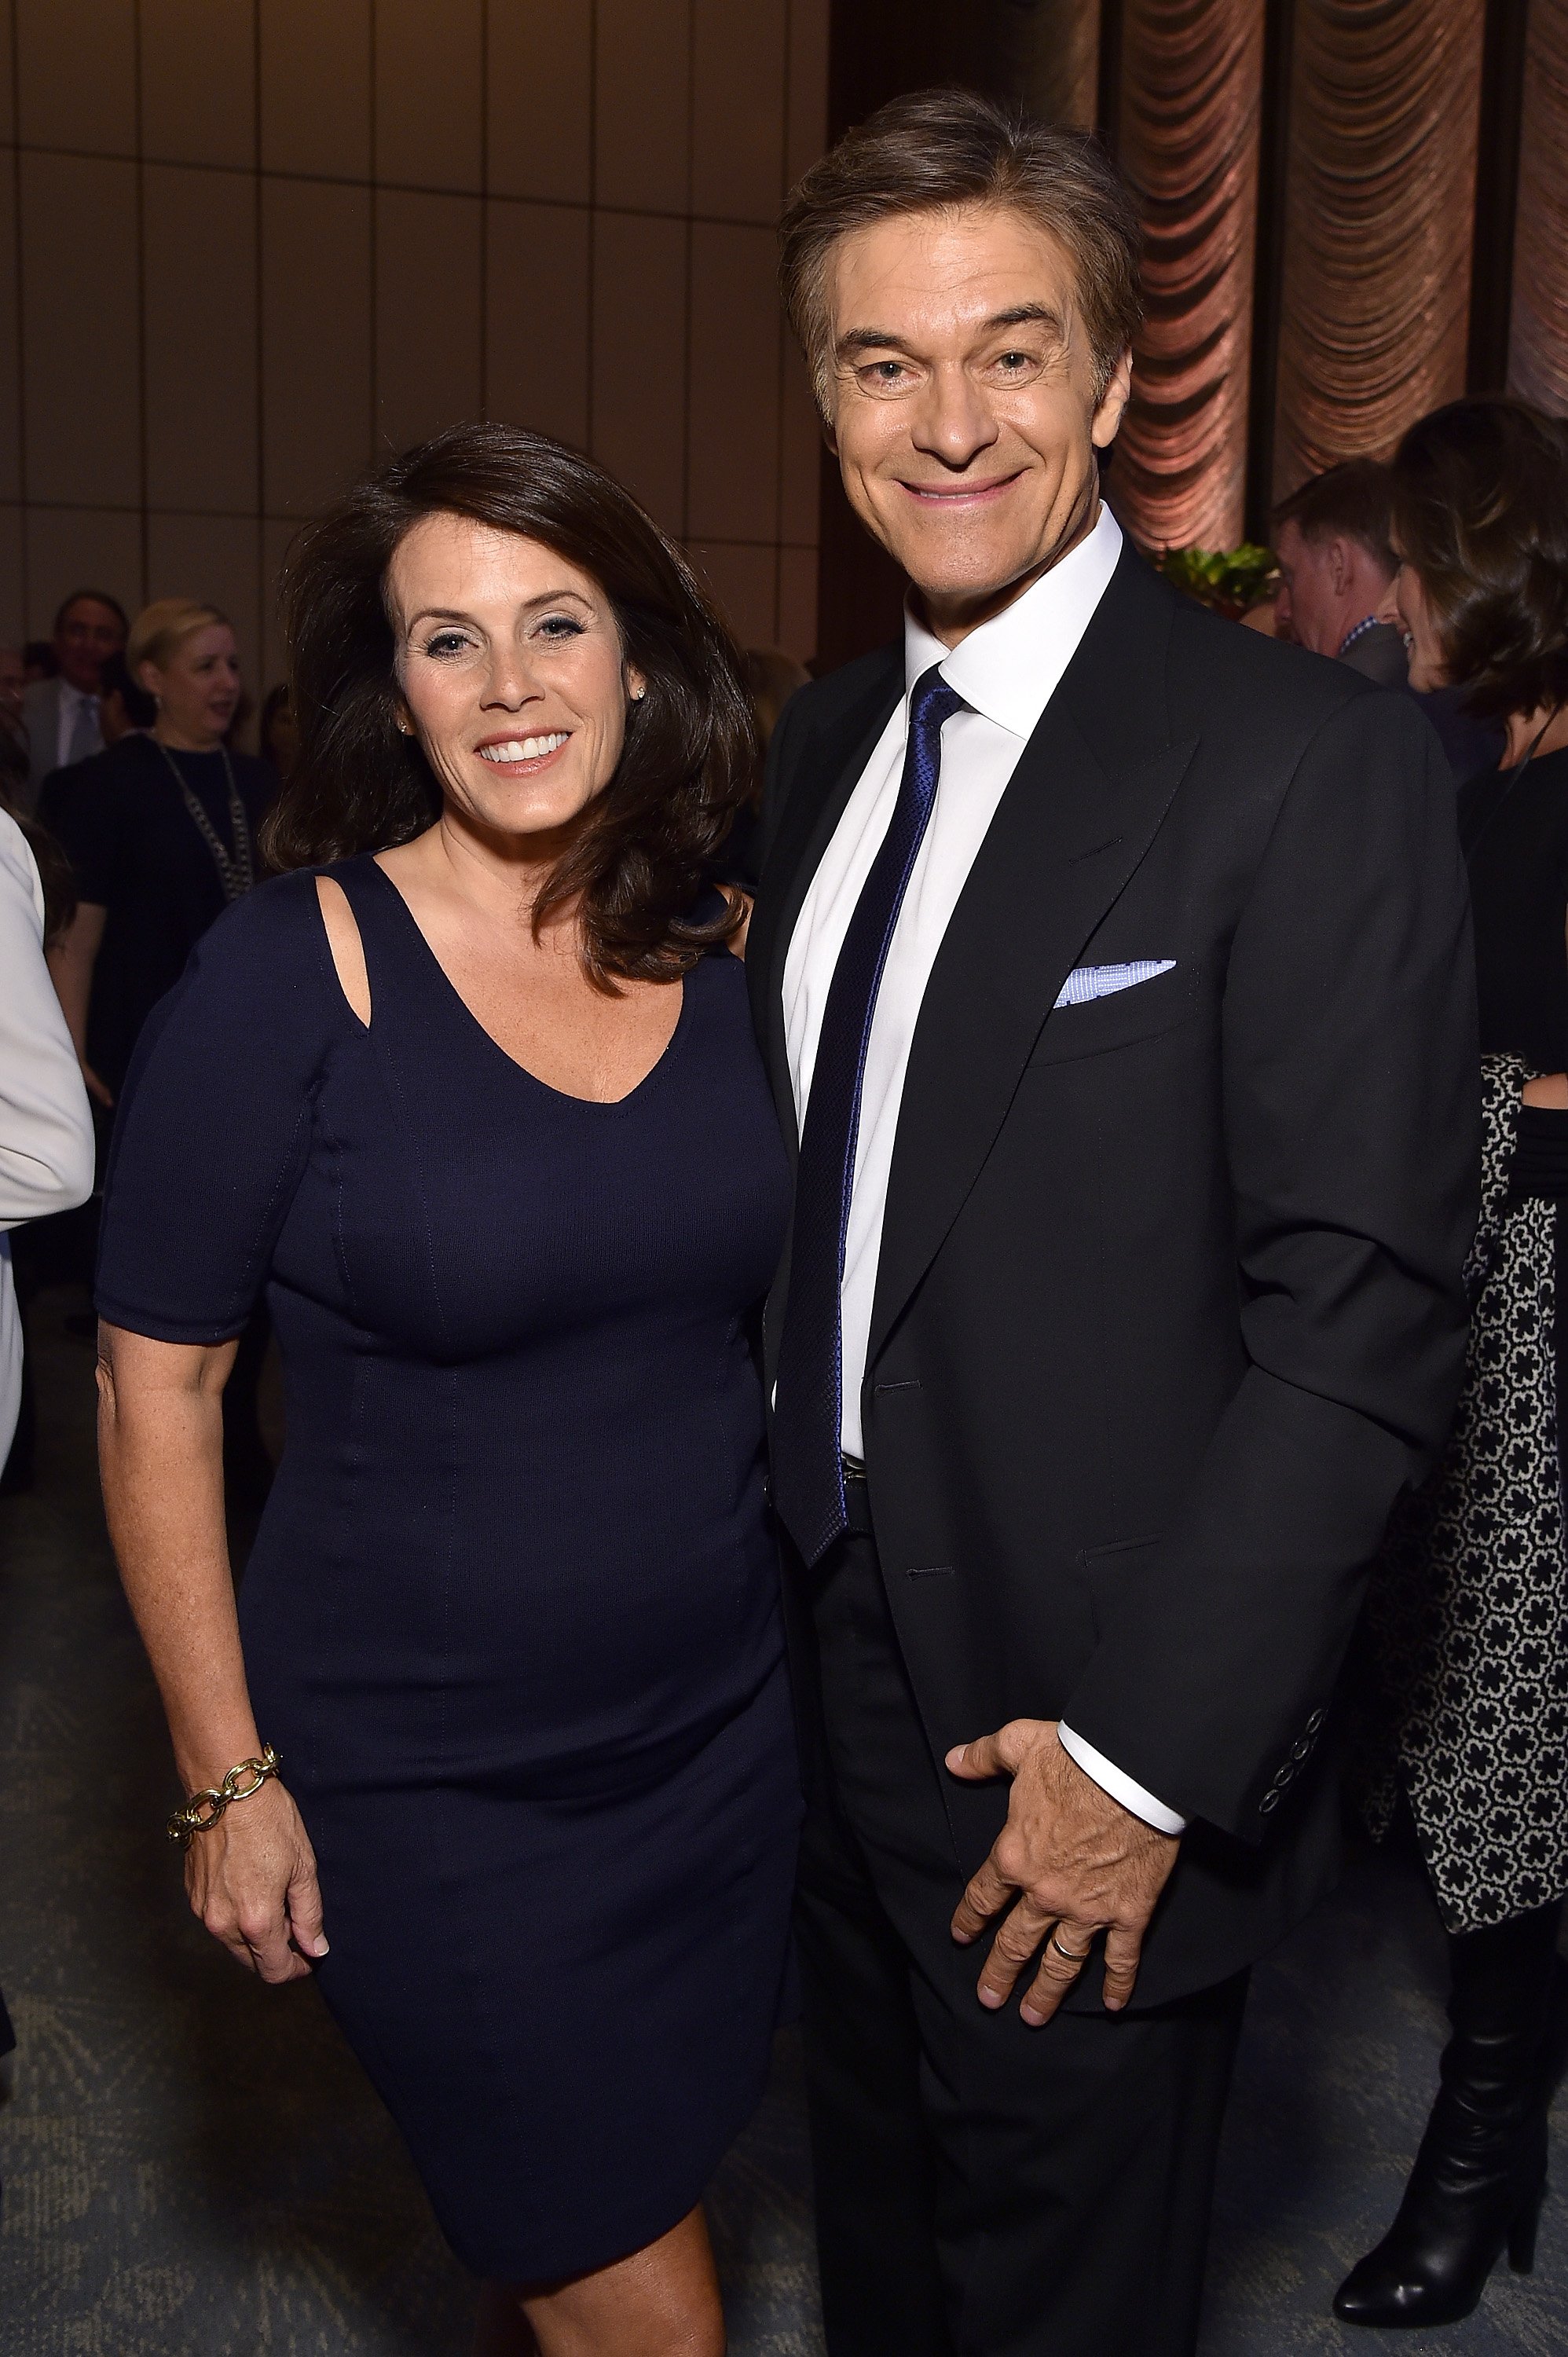 Lisa and Dr. Mehmet Oz attends 35 Most Powerful People in New York Media event in New York City on April 6, 2016 | Photo: Getty Images